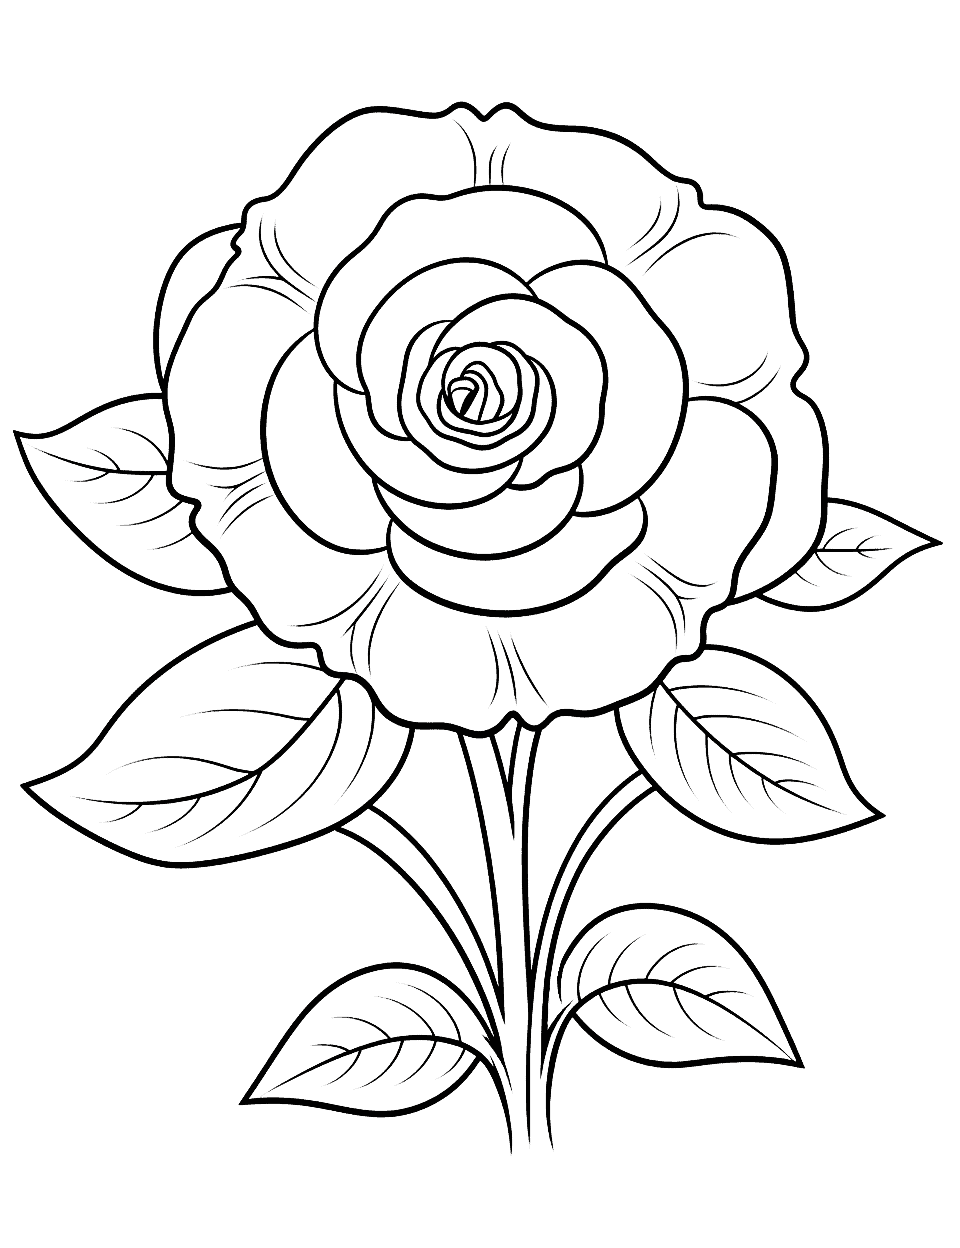 Difficult Rose Challenge Flower Coloring Page - An intricately designed rose coloring page for those seeking a challenge.